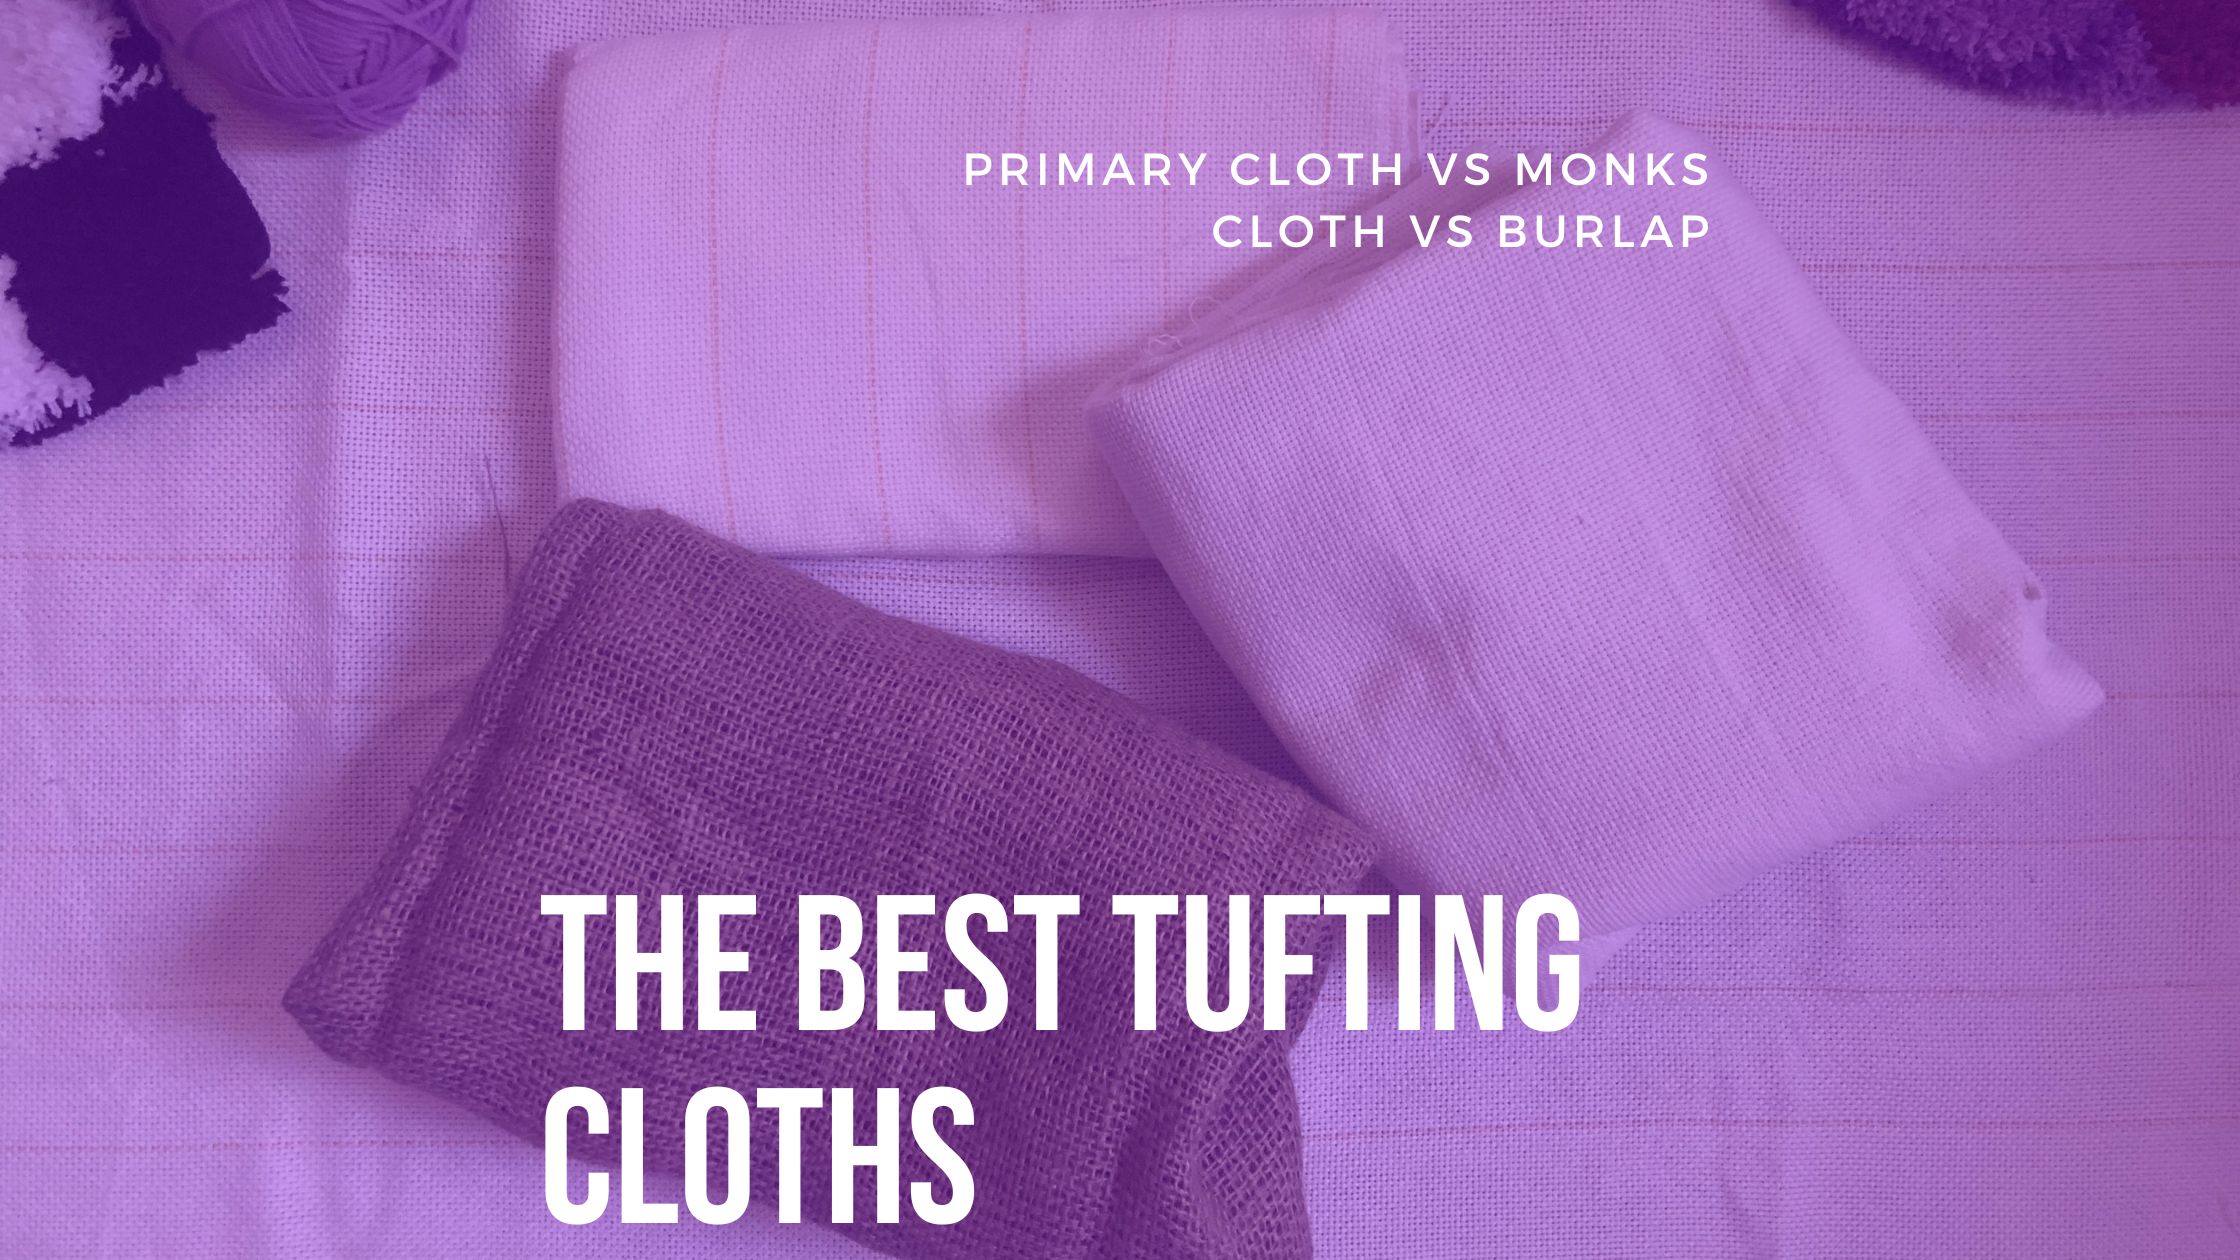 The Best Tufting Cloths: Primary Cloth vs Monks Cloth vs Burlap